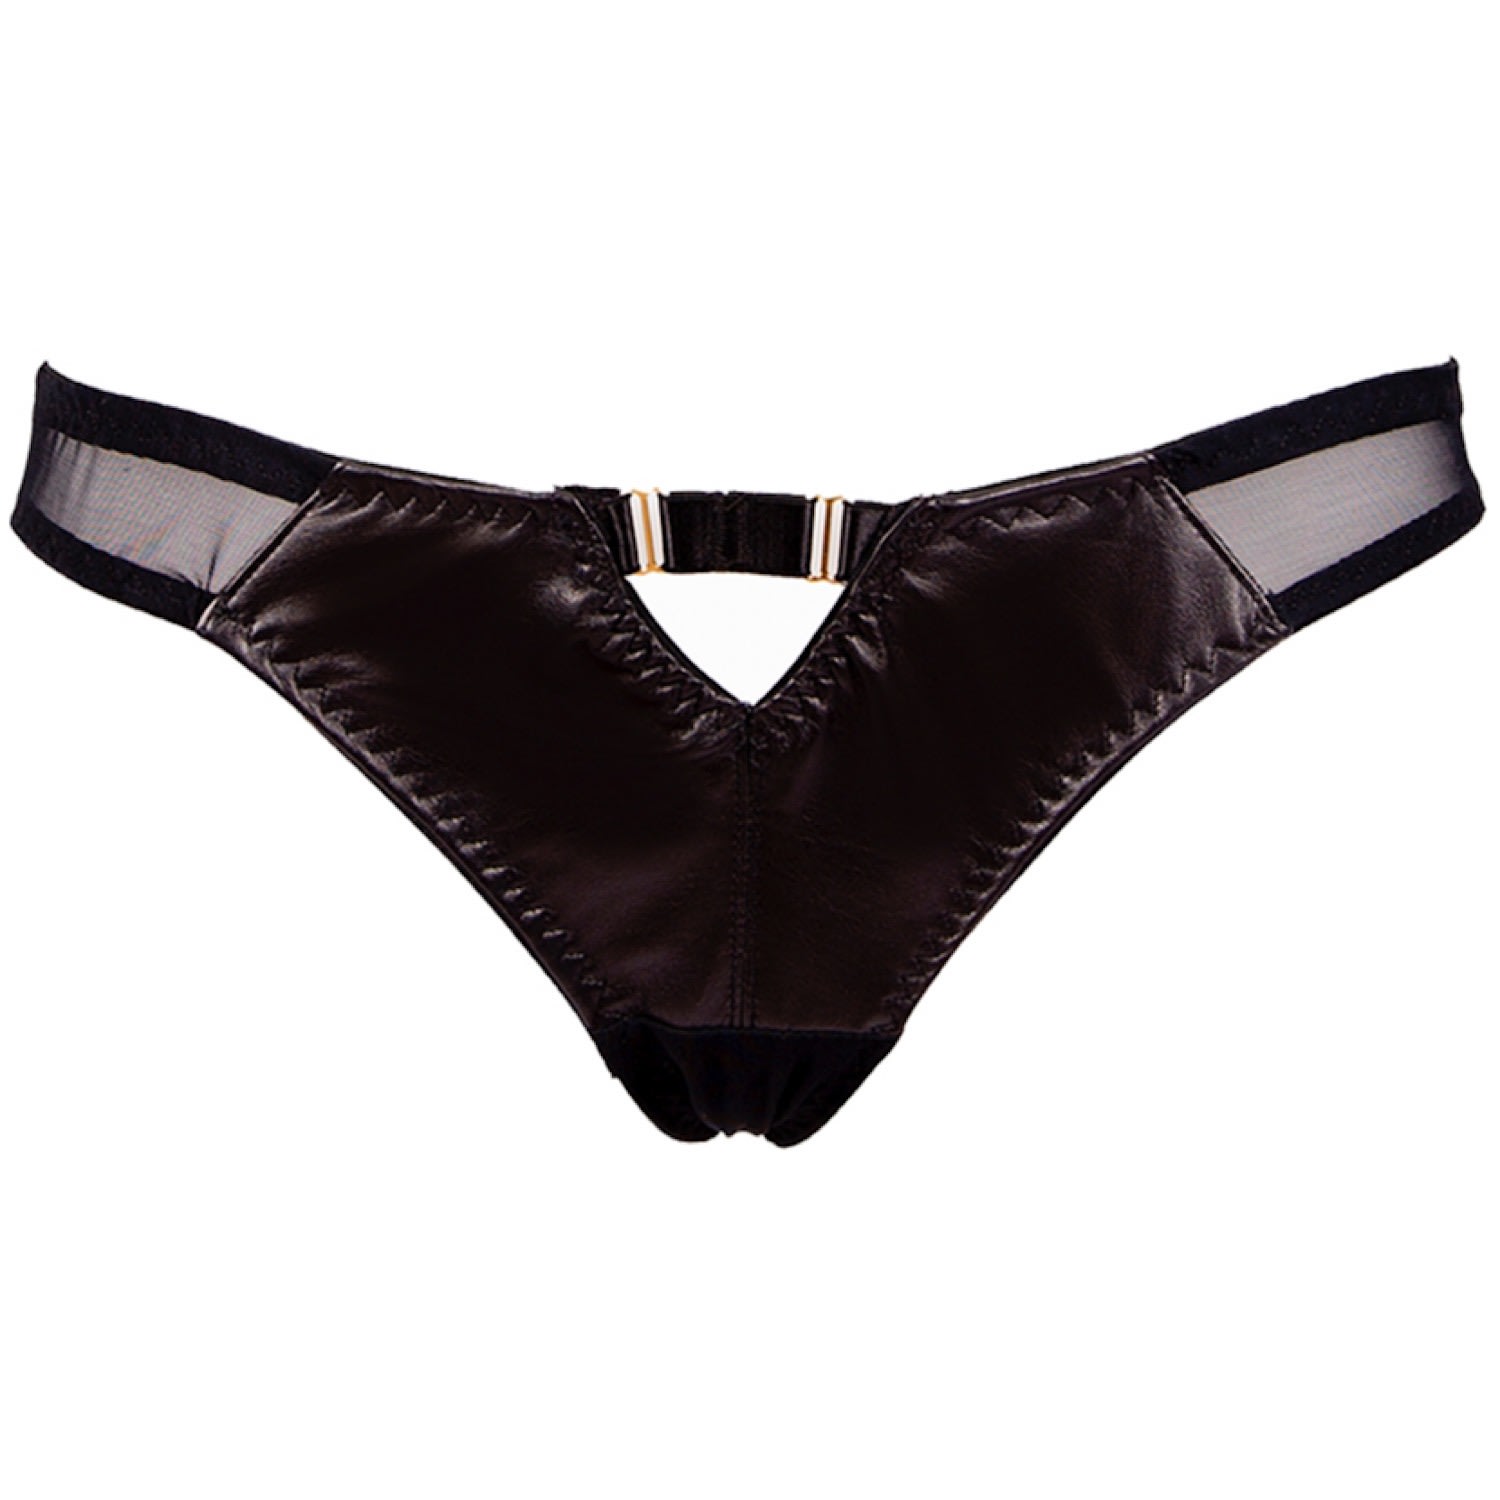 Something Wicked Women's Black Montana Leather Open Back Ouvert Brief